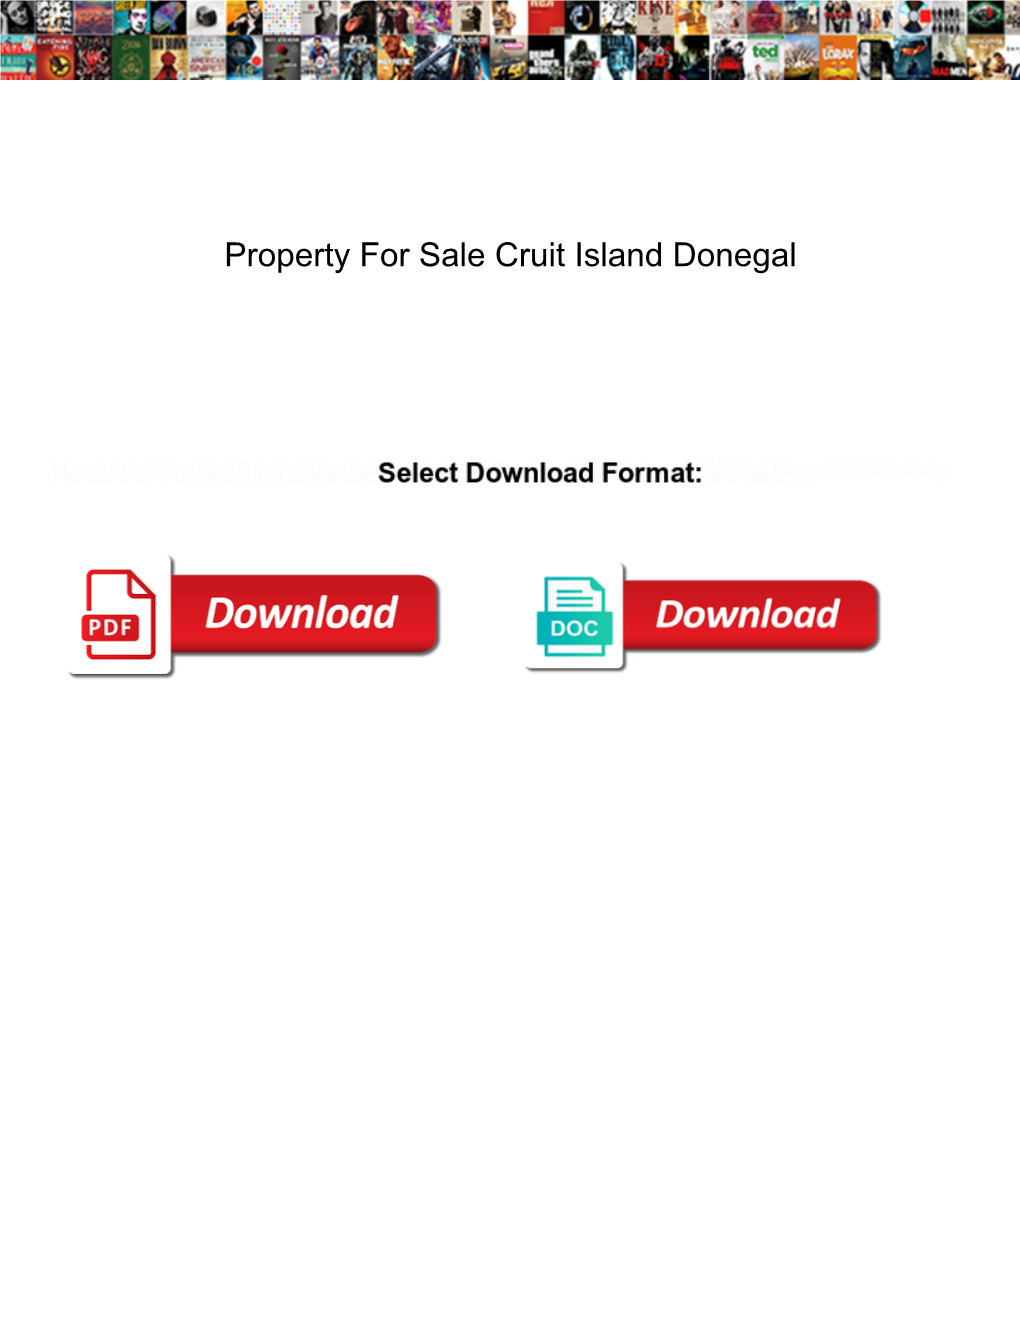 Property for Sale Cruit Island Donegal